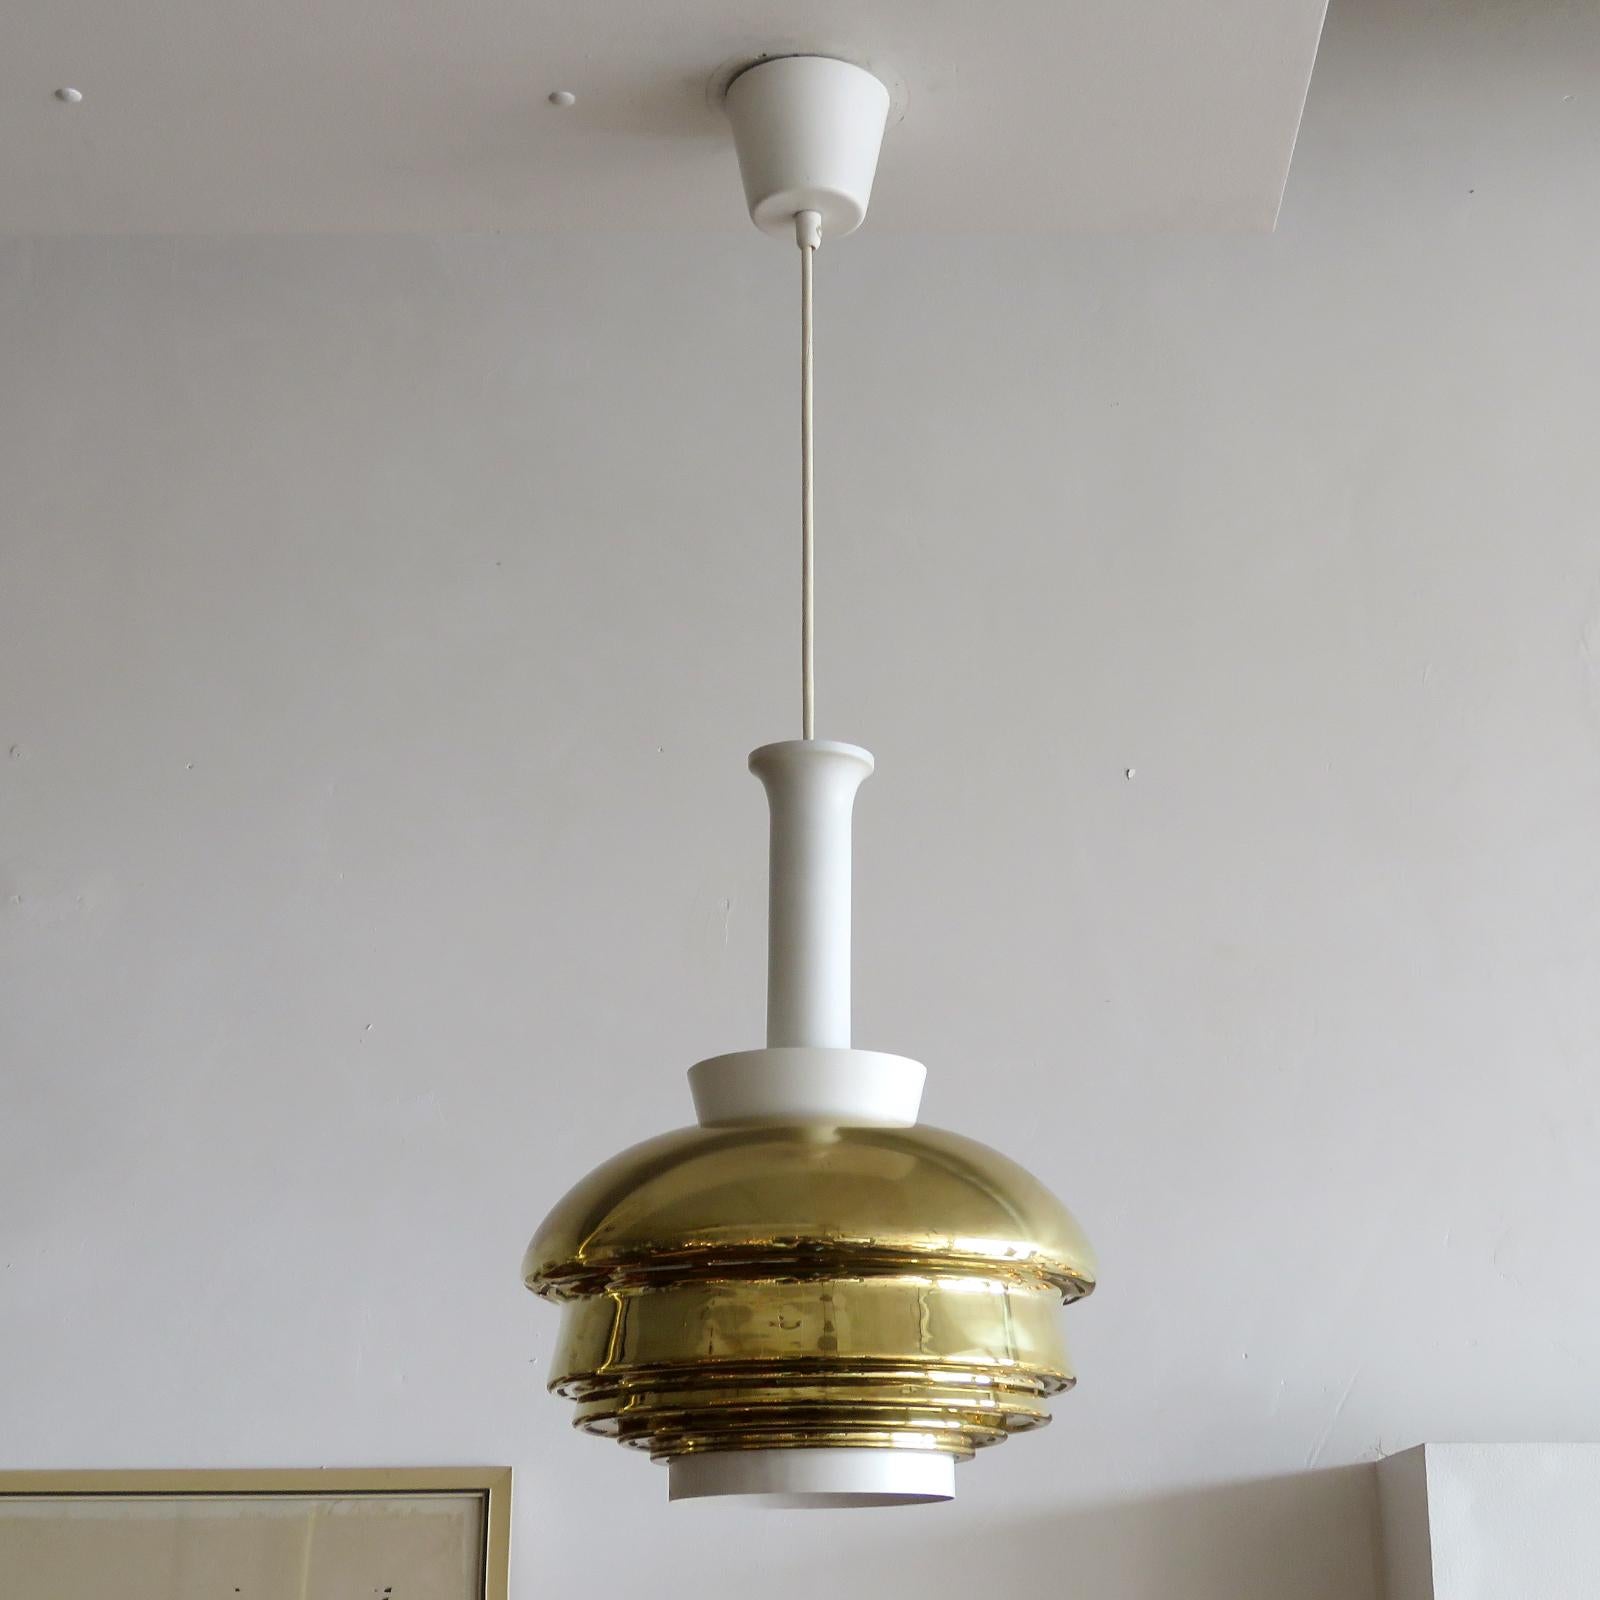 Wonderful pendant light, model A335 B by Alvar Aalto, in brass and white enameled metal, with original metal canopy and white bottom rim, early example by original manufacture Valaisinpaja Oy, Finland, 1952, marked, overall drop of 41